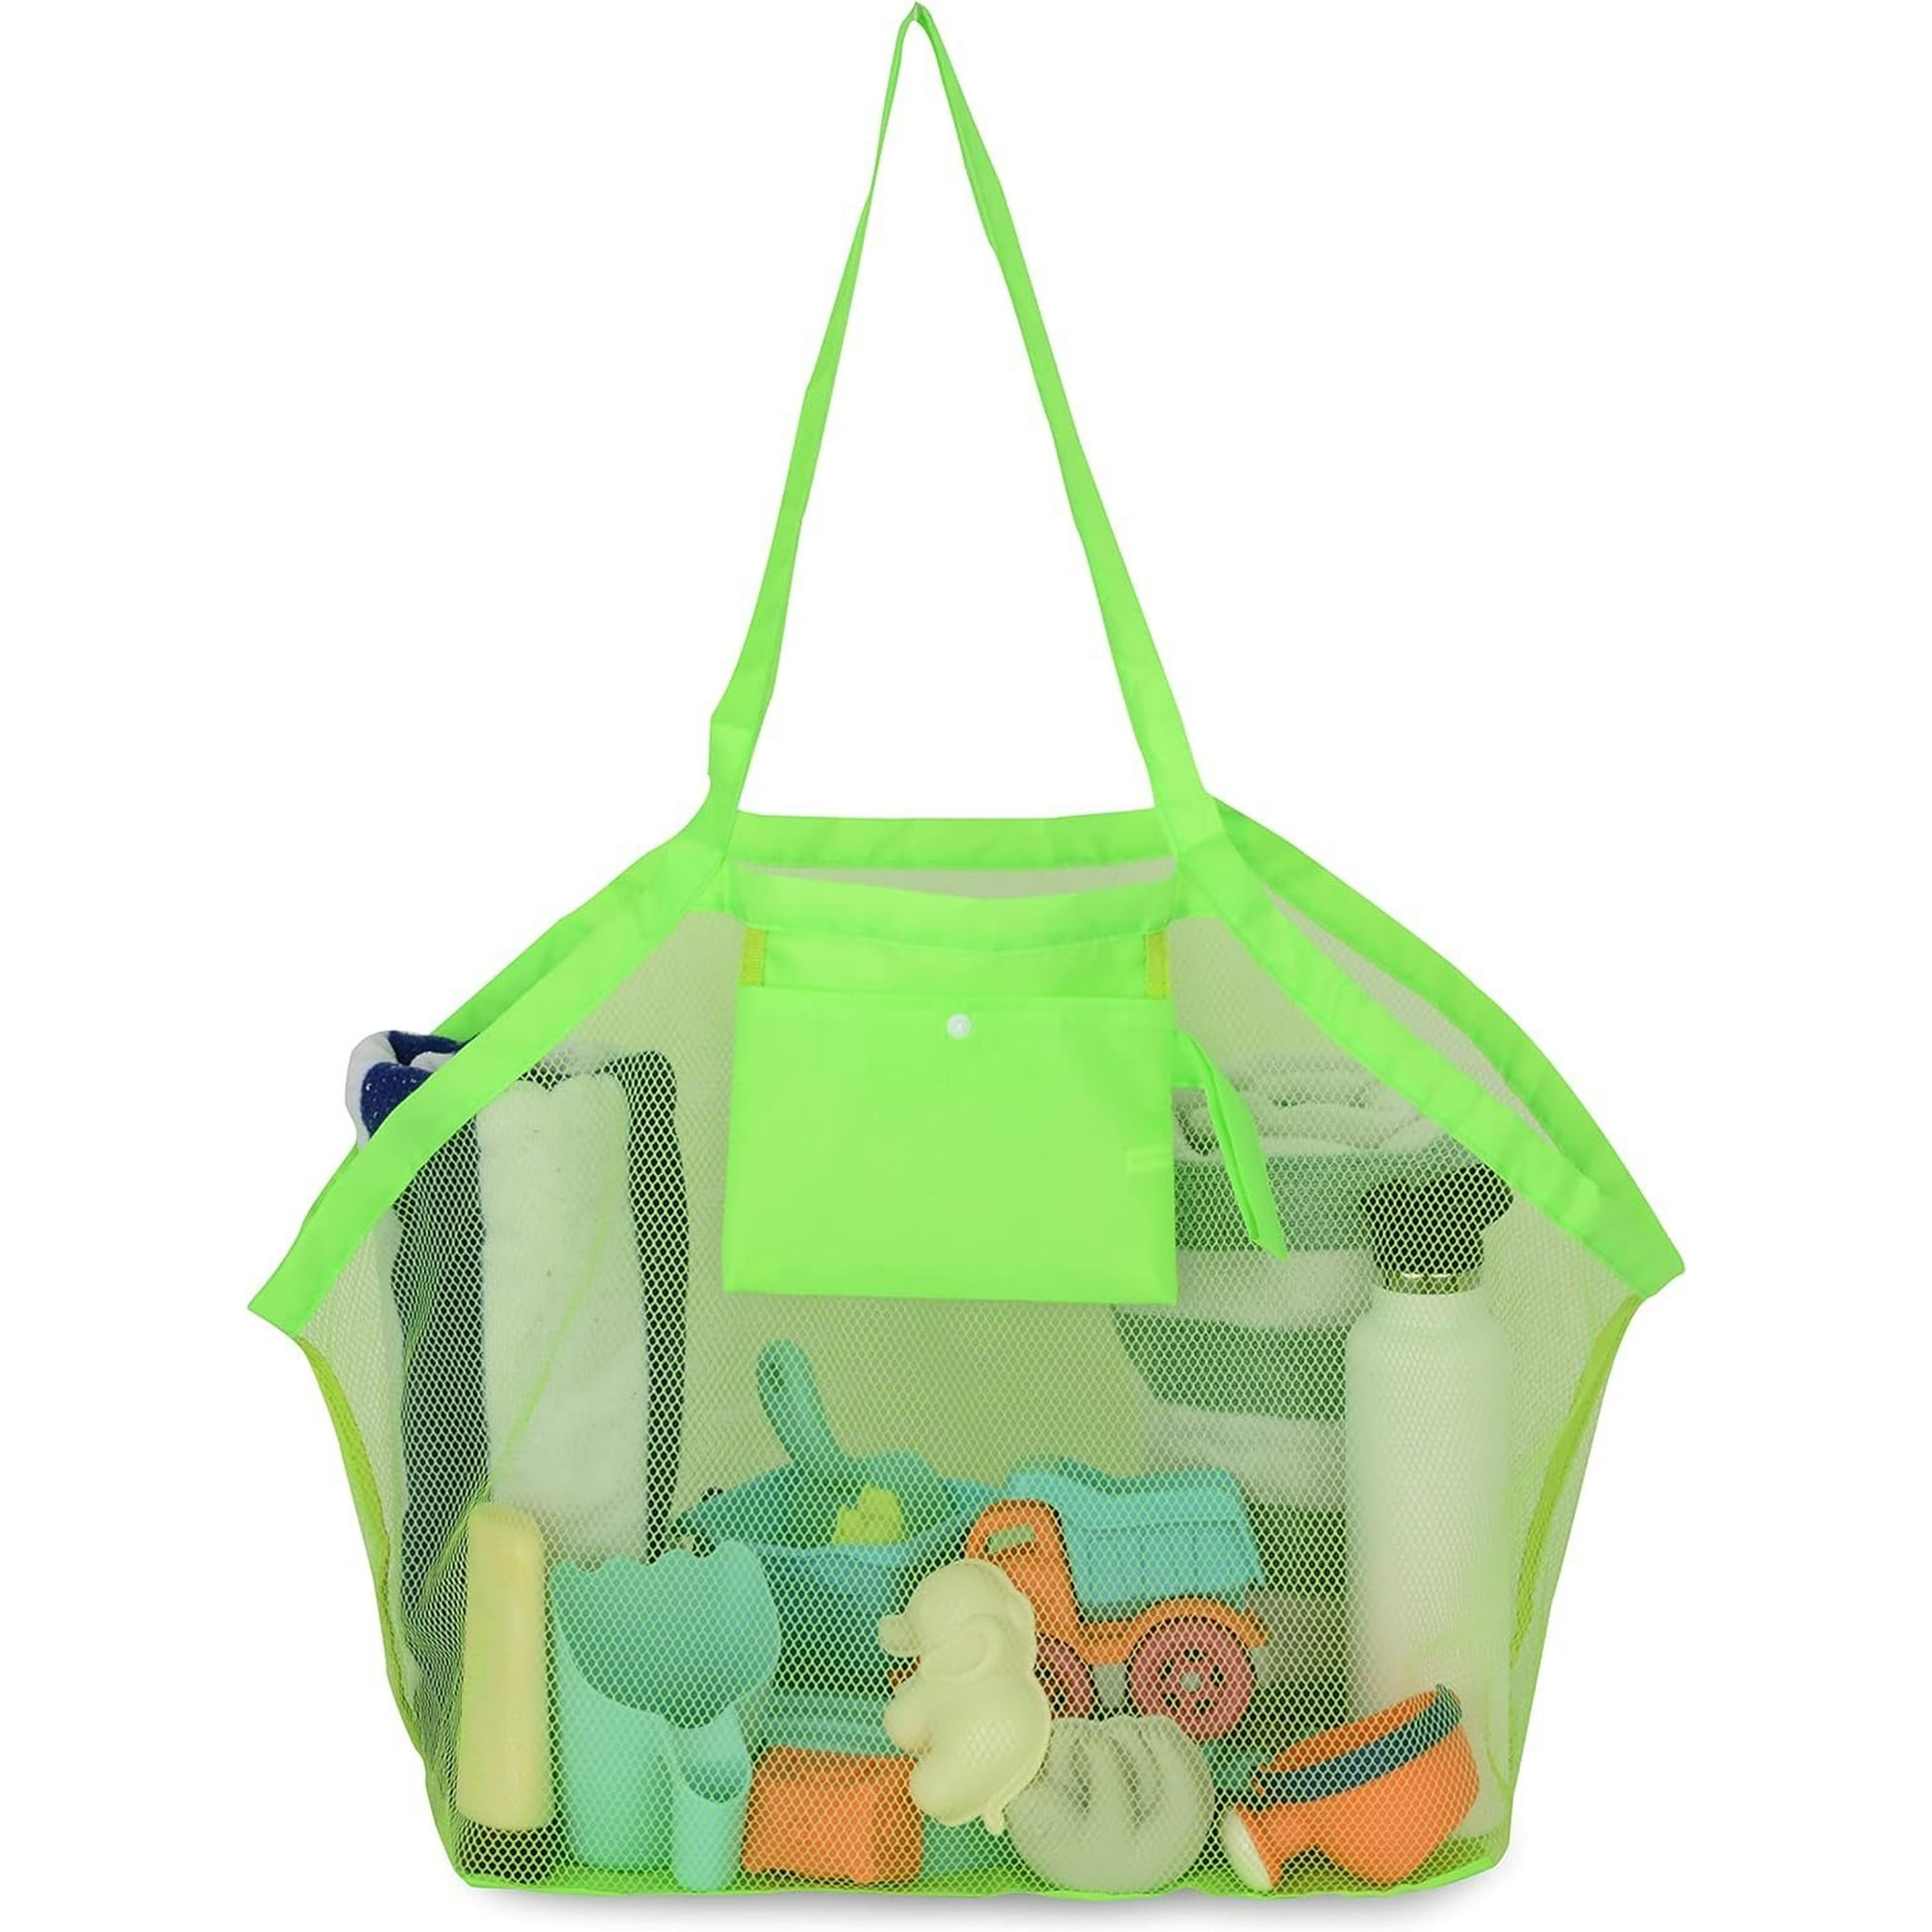 Rolling Nomad - Large Green Beach Toy Reusable Bag, Mesh Tote for